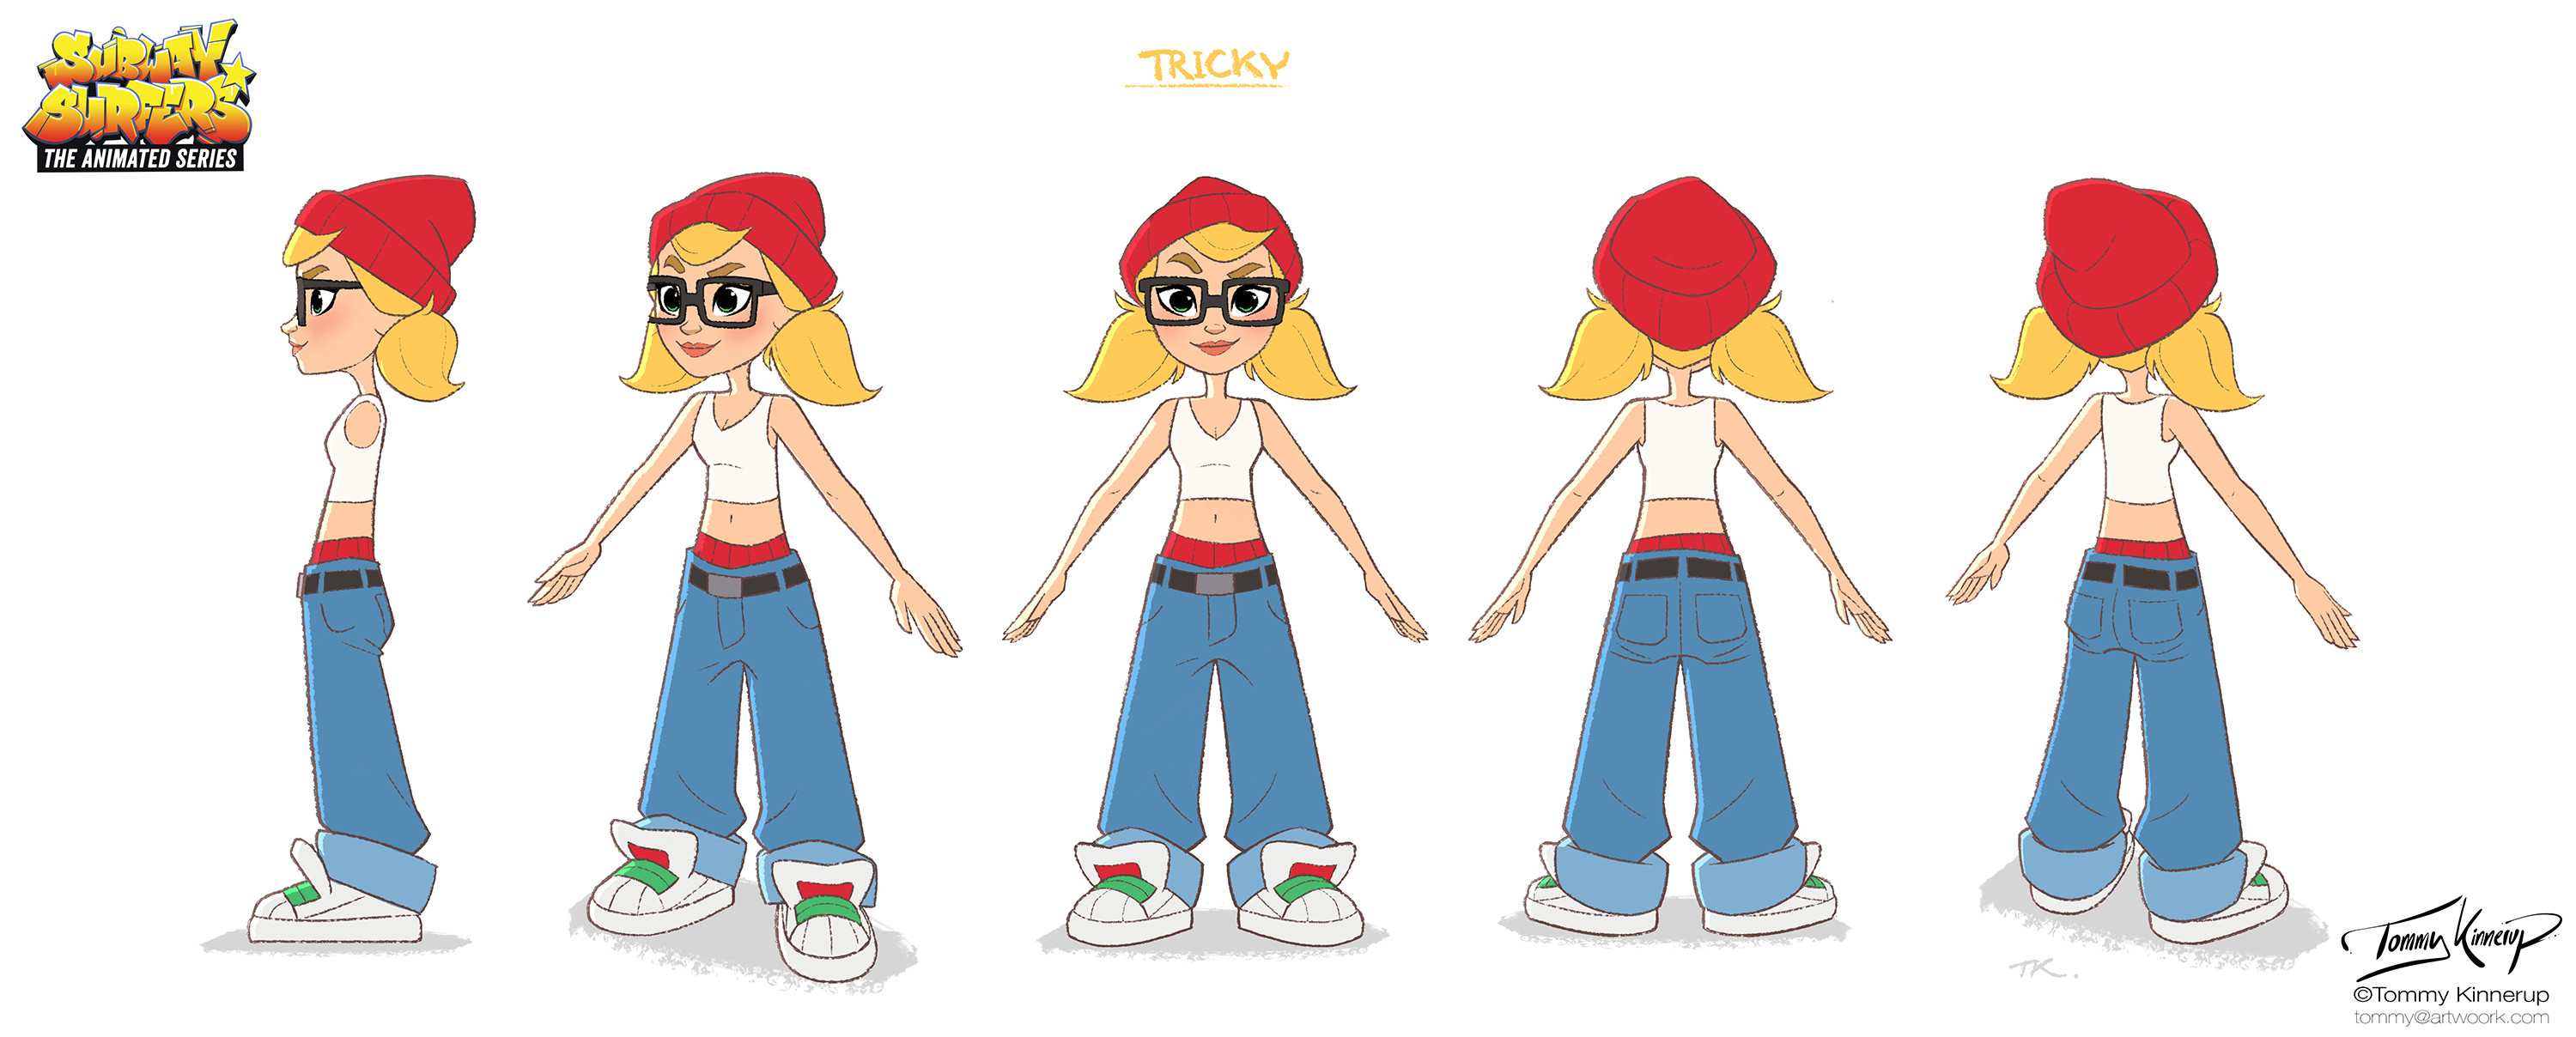 Tricky's orthographic views